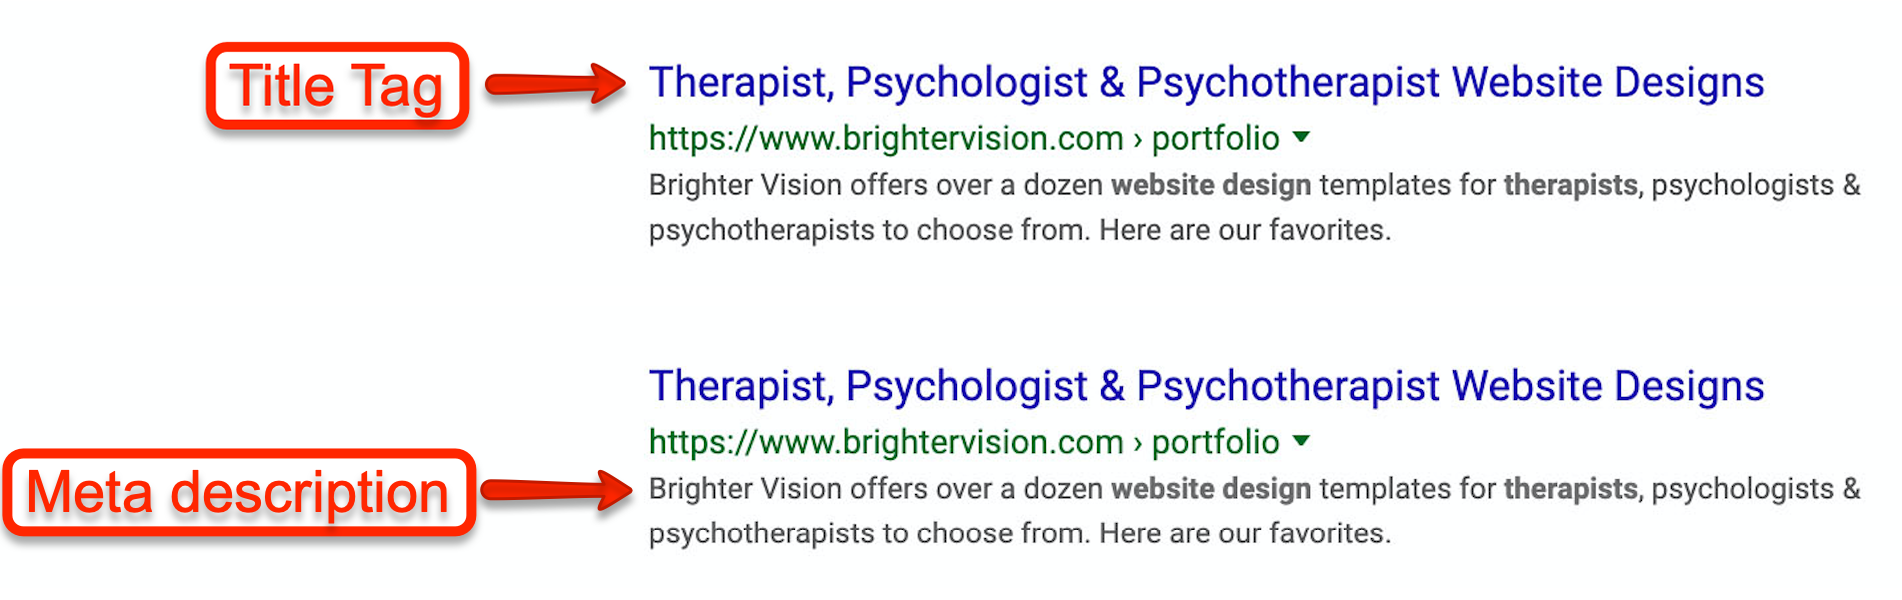 meta tags | Why Single-Page Websites Are Bad for SEO | Brighter Vision | Marketing Blog for Therapists